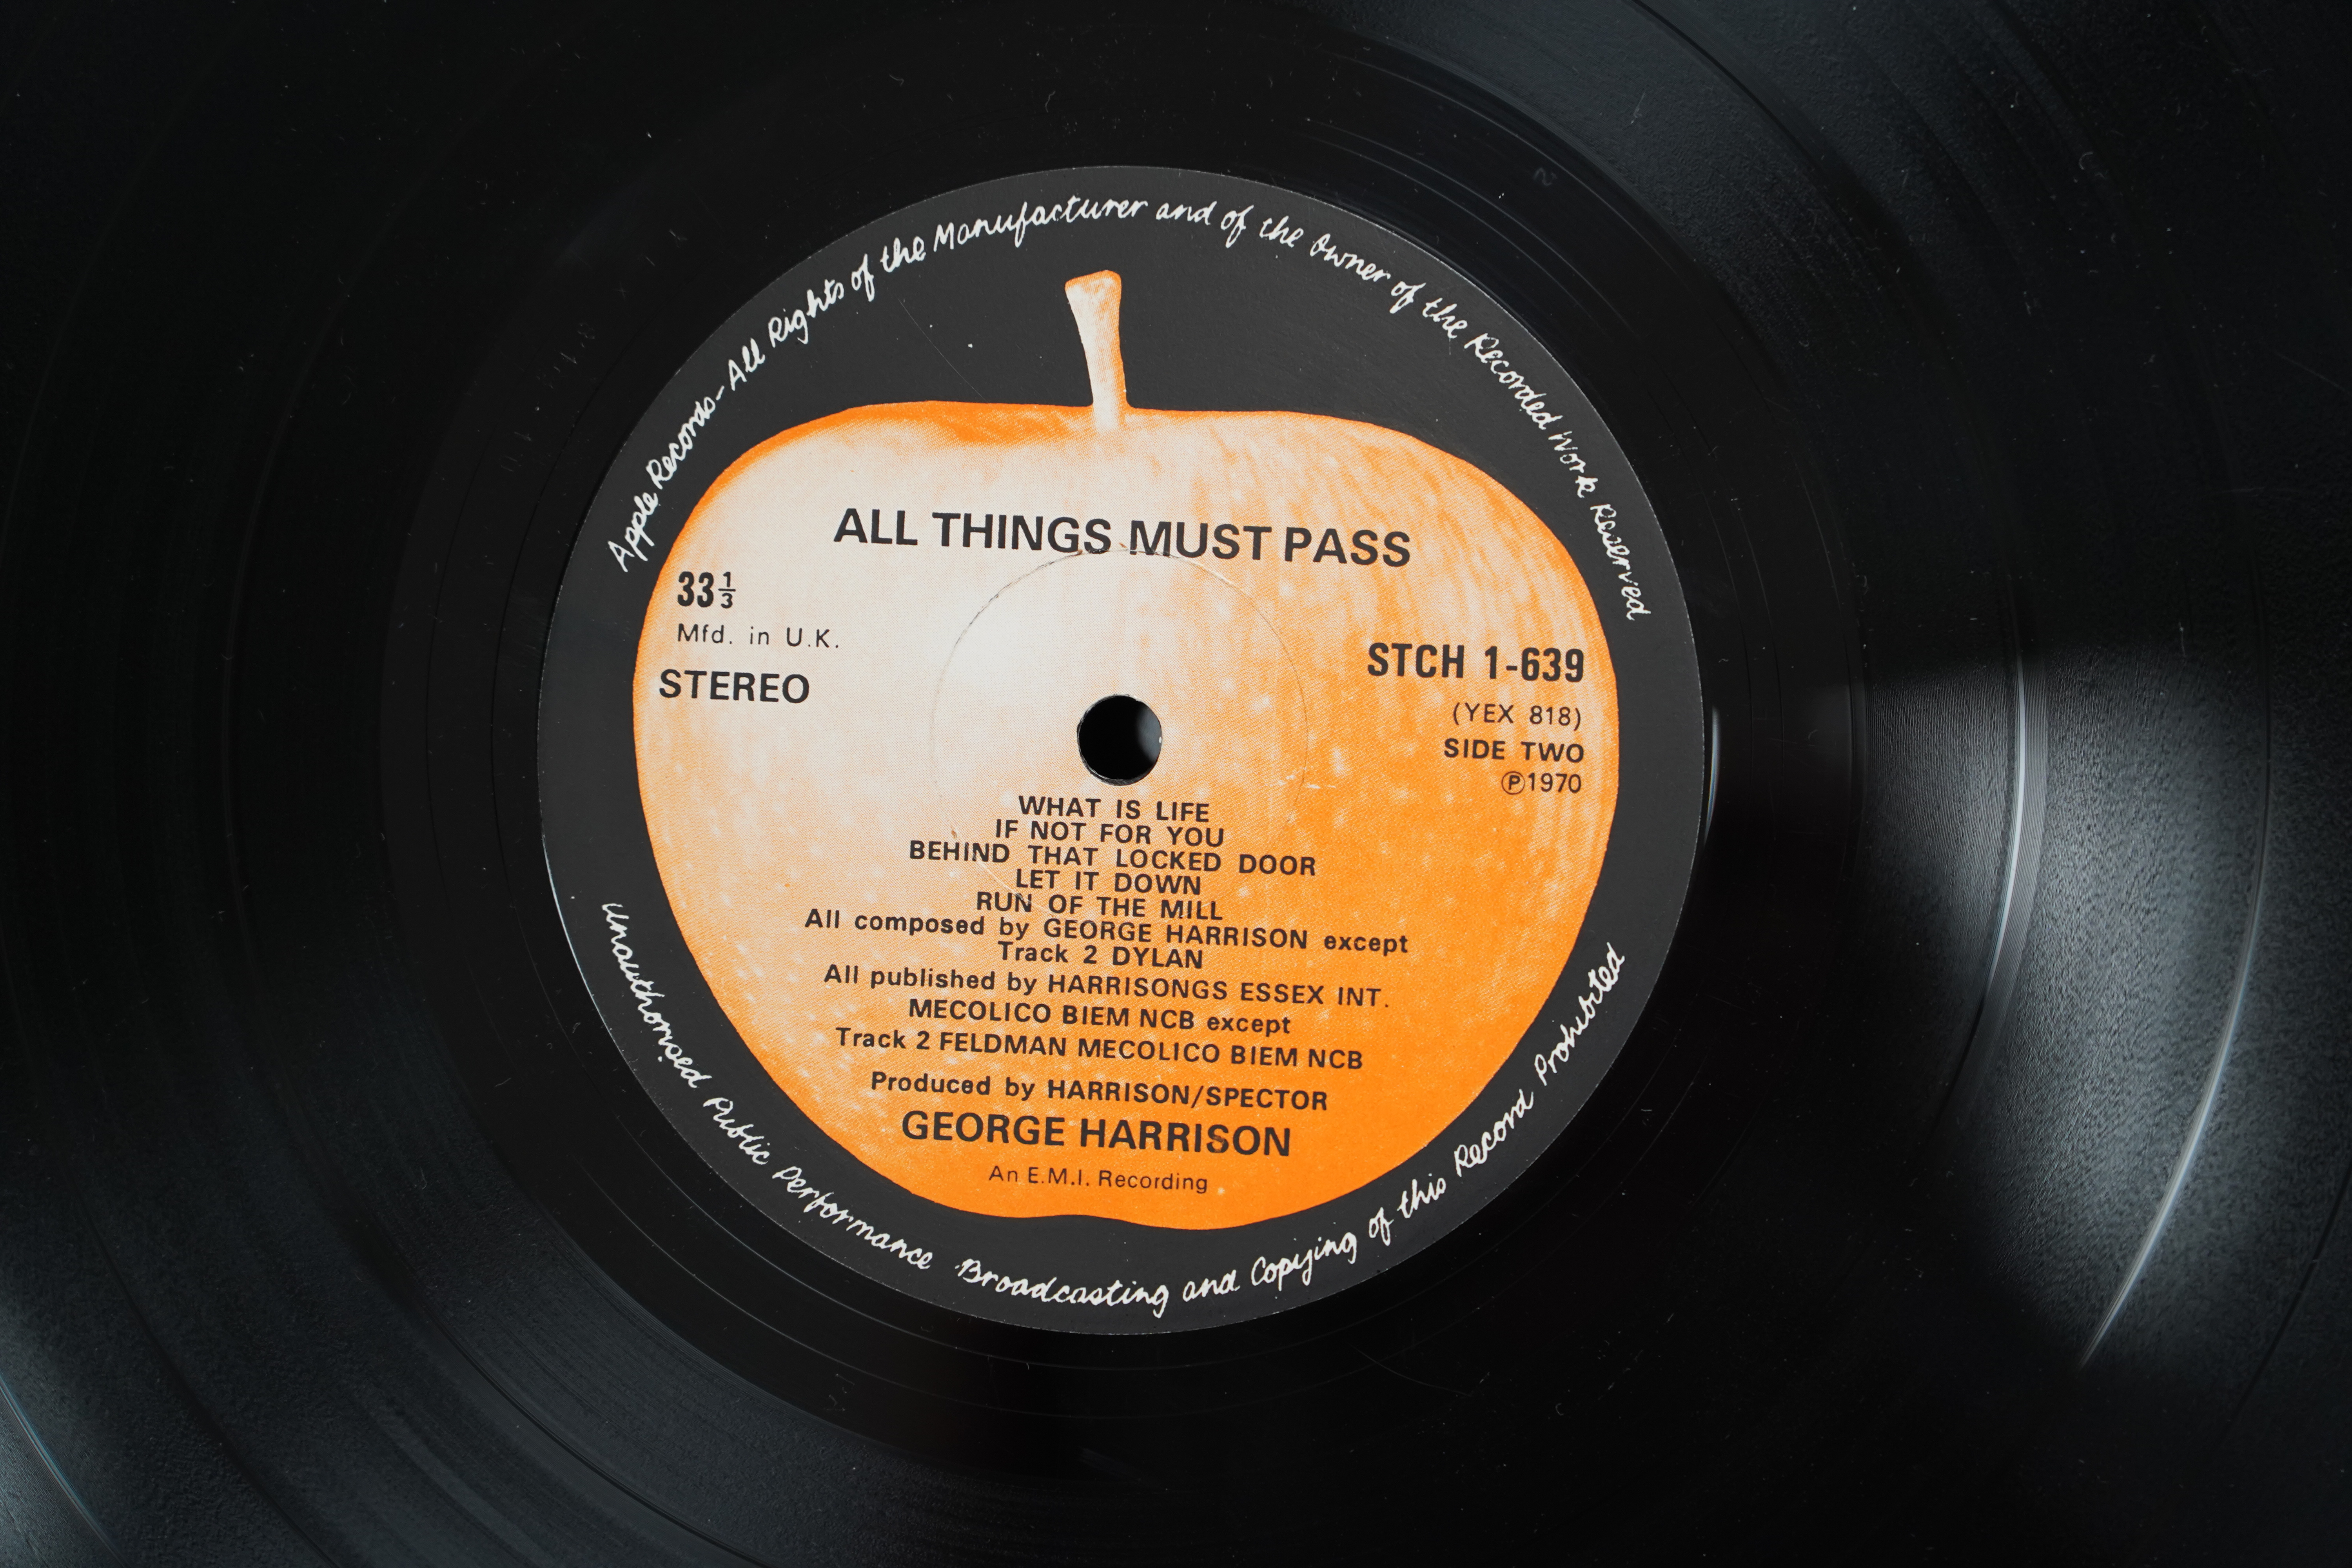 George Harrison, All Things Must Pass 3-LP box set (missing poster), STH 1-639